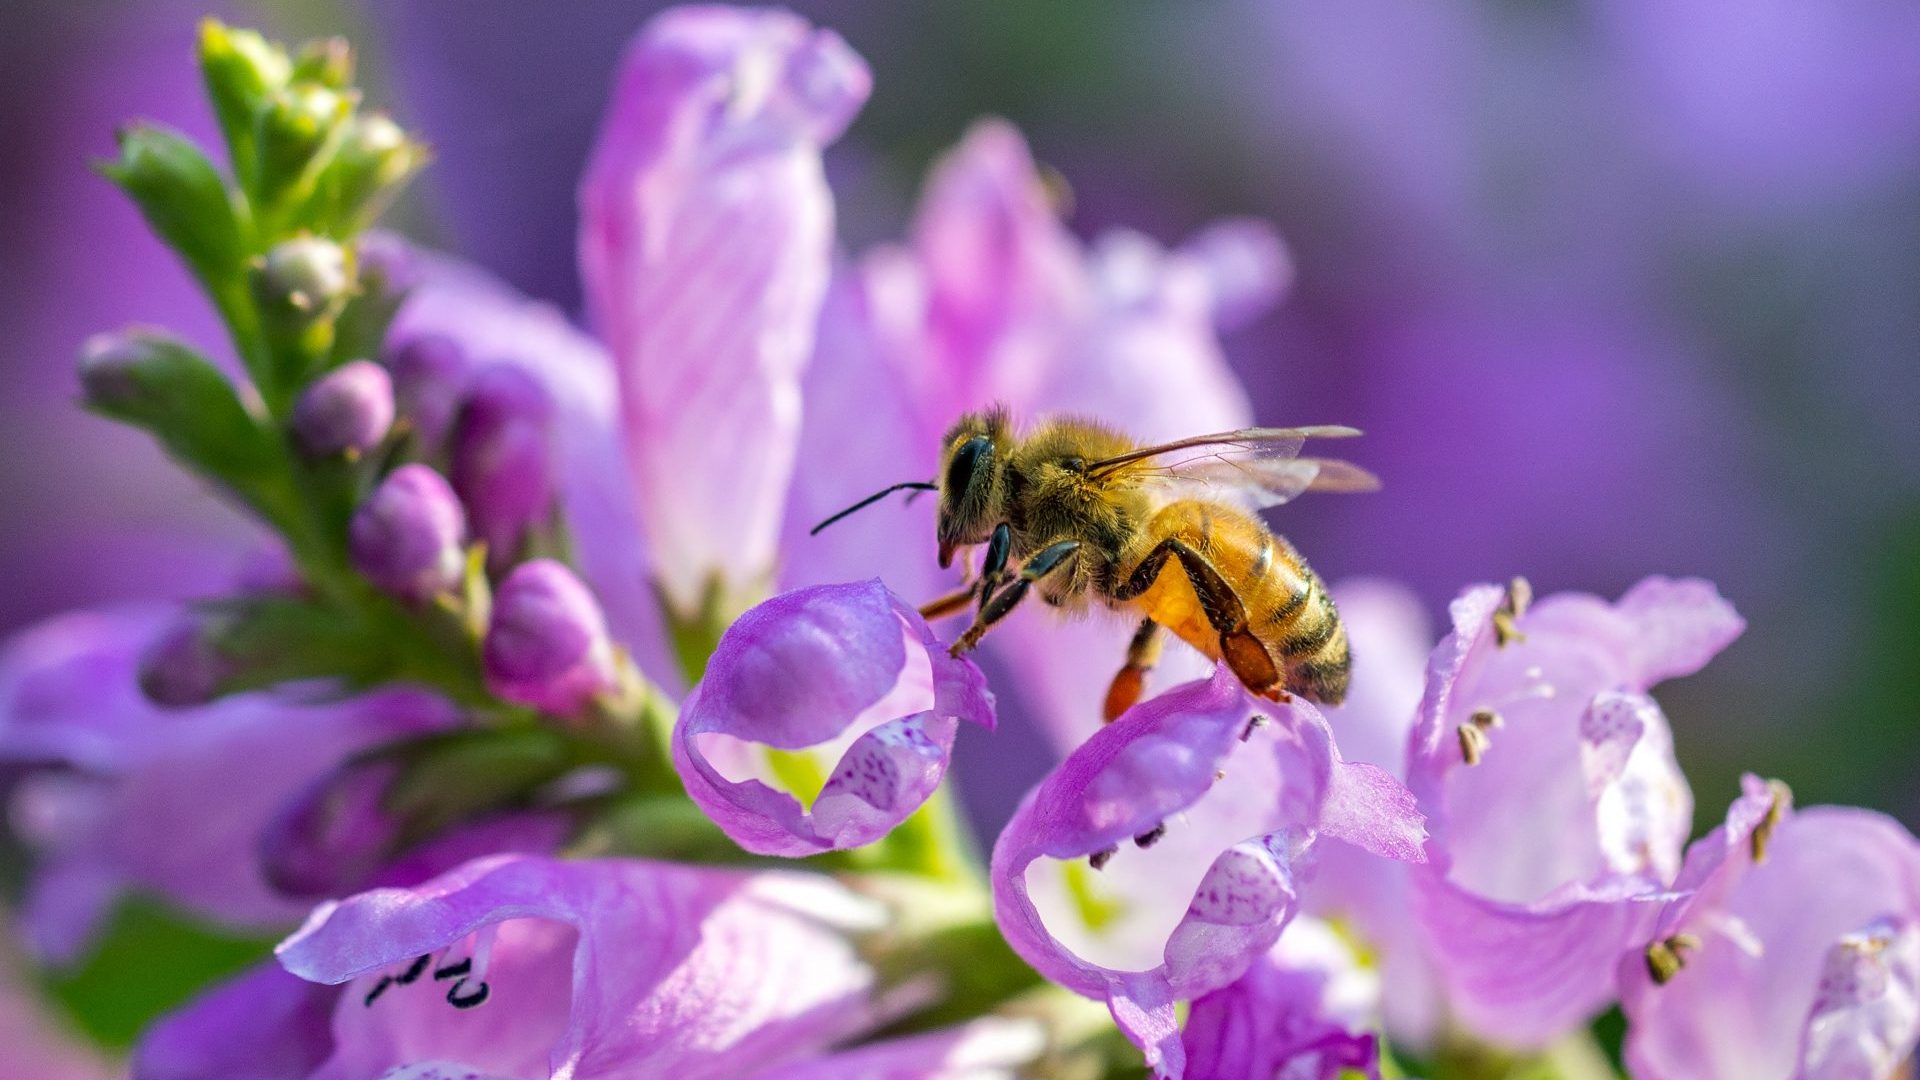 Bees, Fish, & a Win for Invertebrate Protections